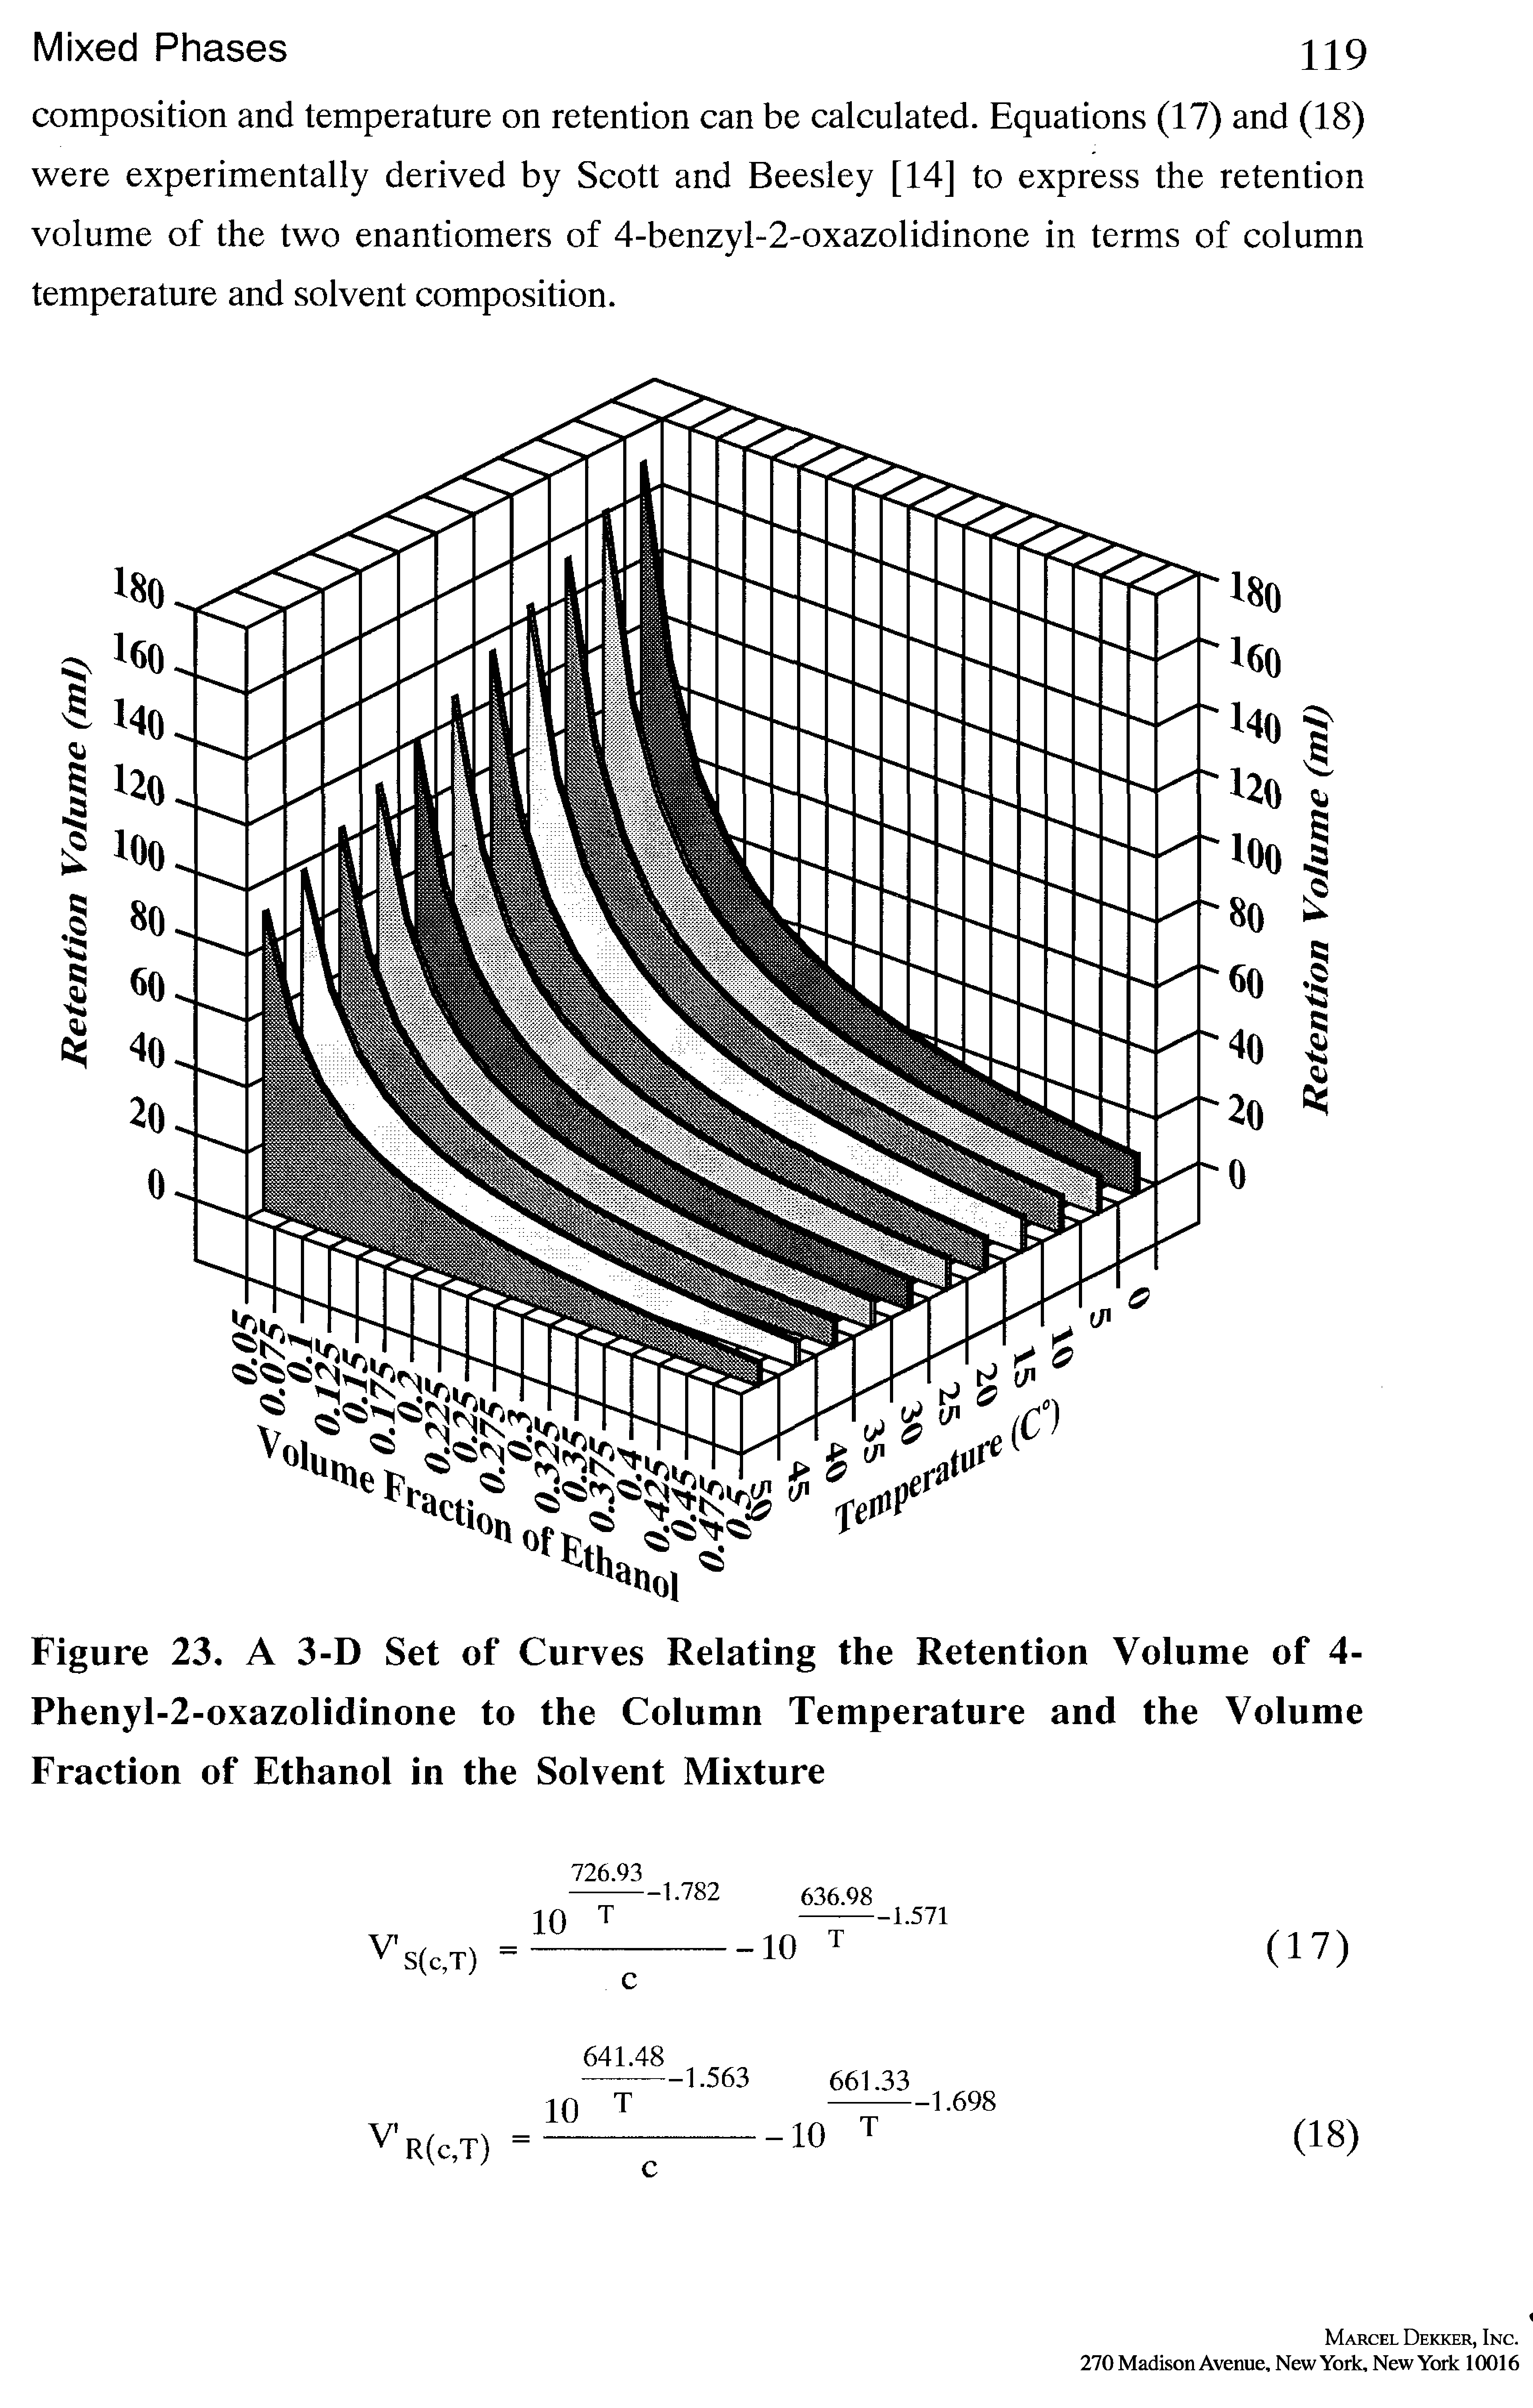 Figure 23. A 3-D Set of Curves Relating the Retention Volume of 4-Phenyl-2-oxazolidinone to the Column Temperature and the Volume Fraction of Ethanol in the Solvent Mixture...